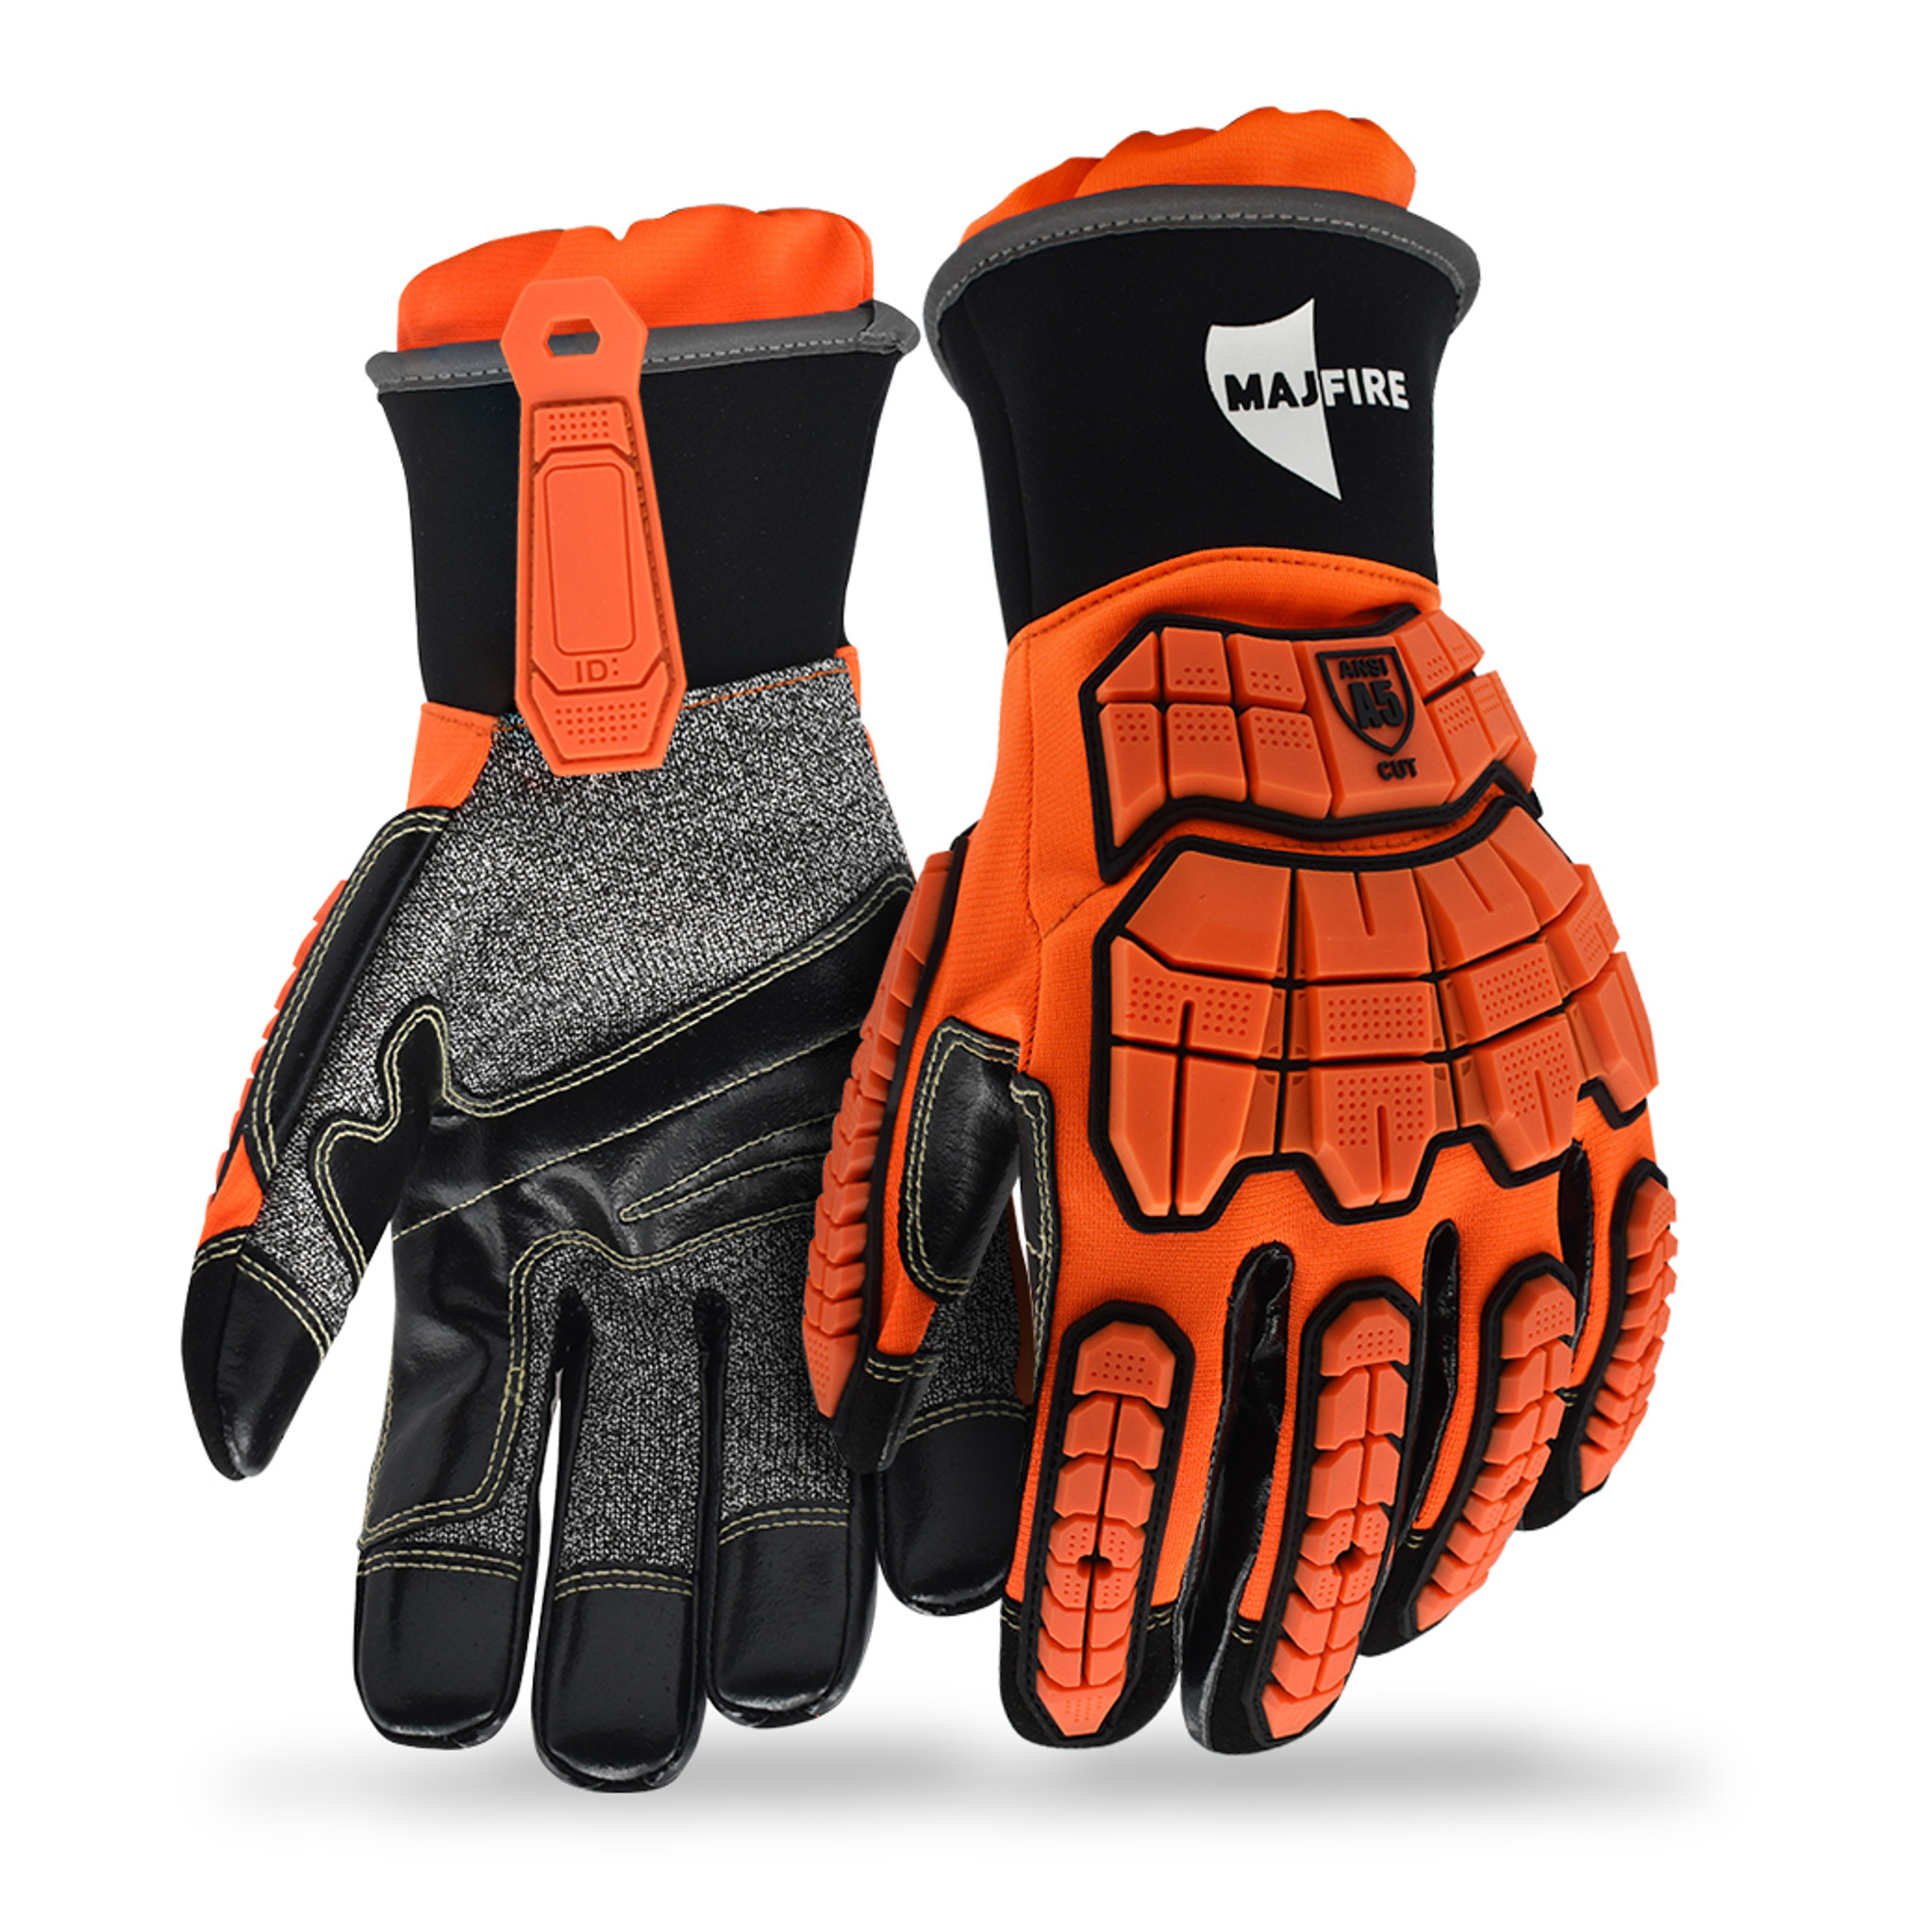 MFA14 Oil & Water Resistant Gloves- ANSI 5 cut rated Cala Tech palm -  Majestic Safety Apparel